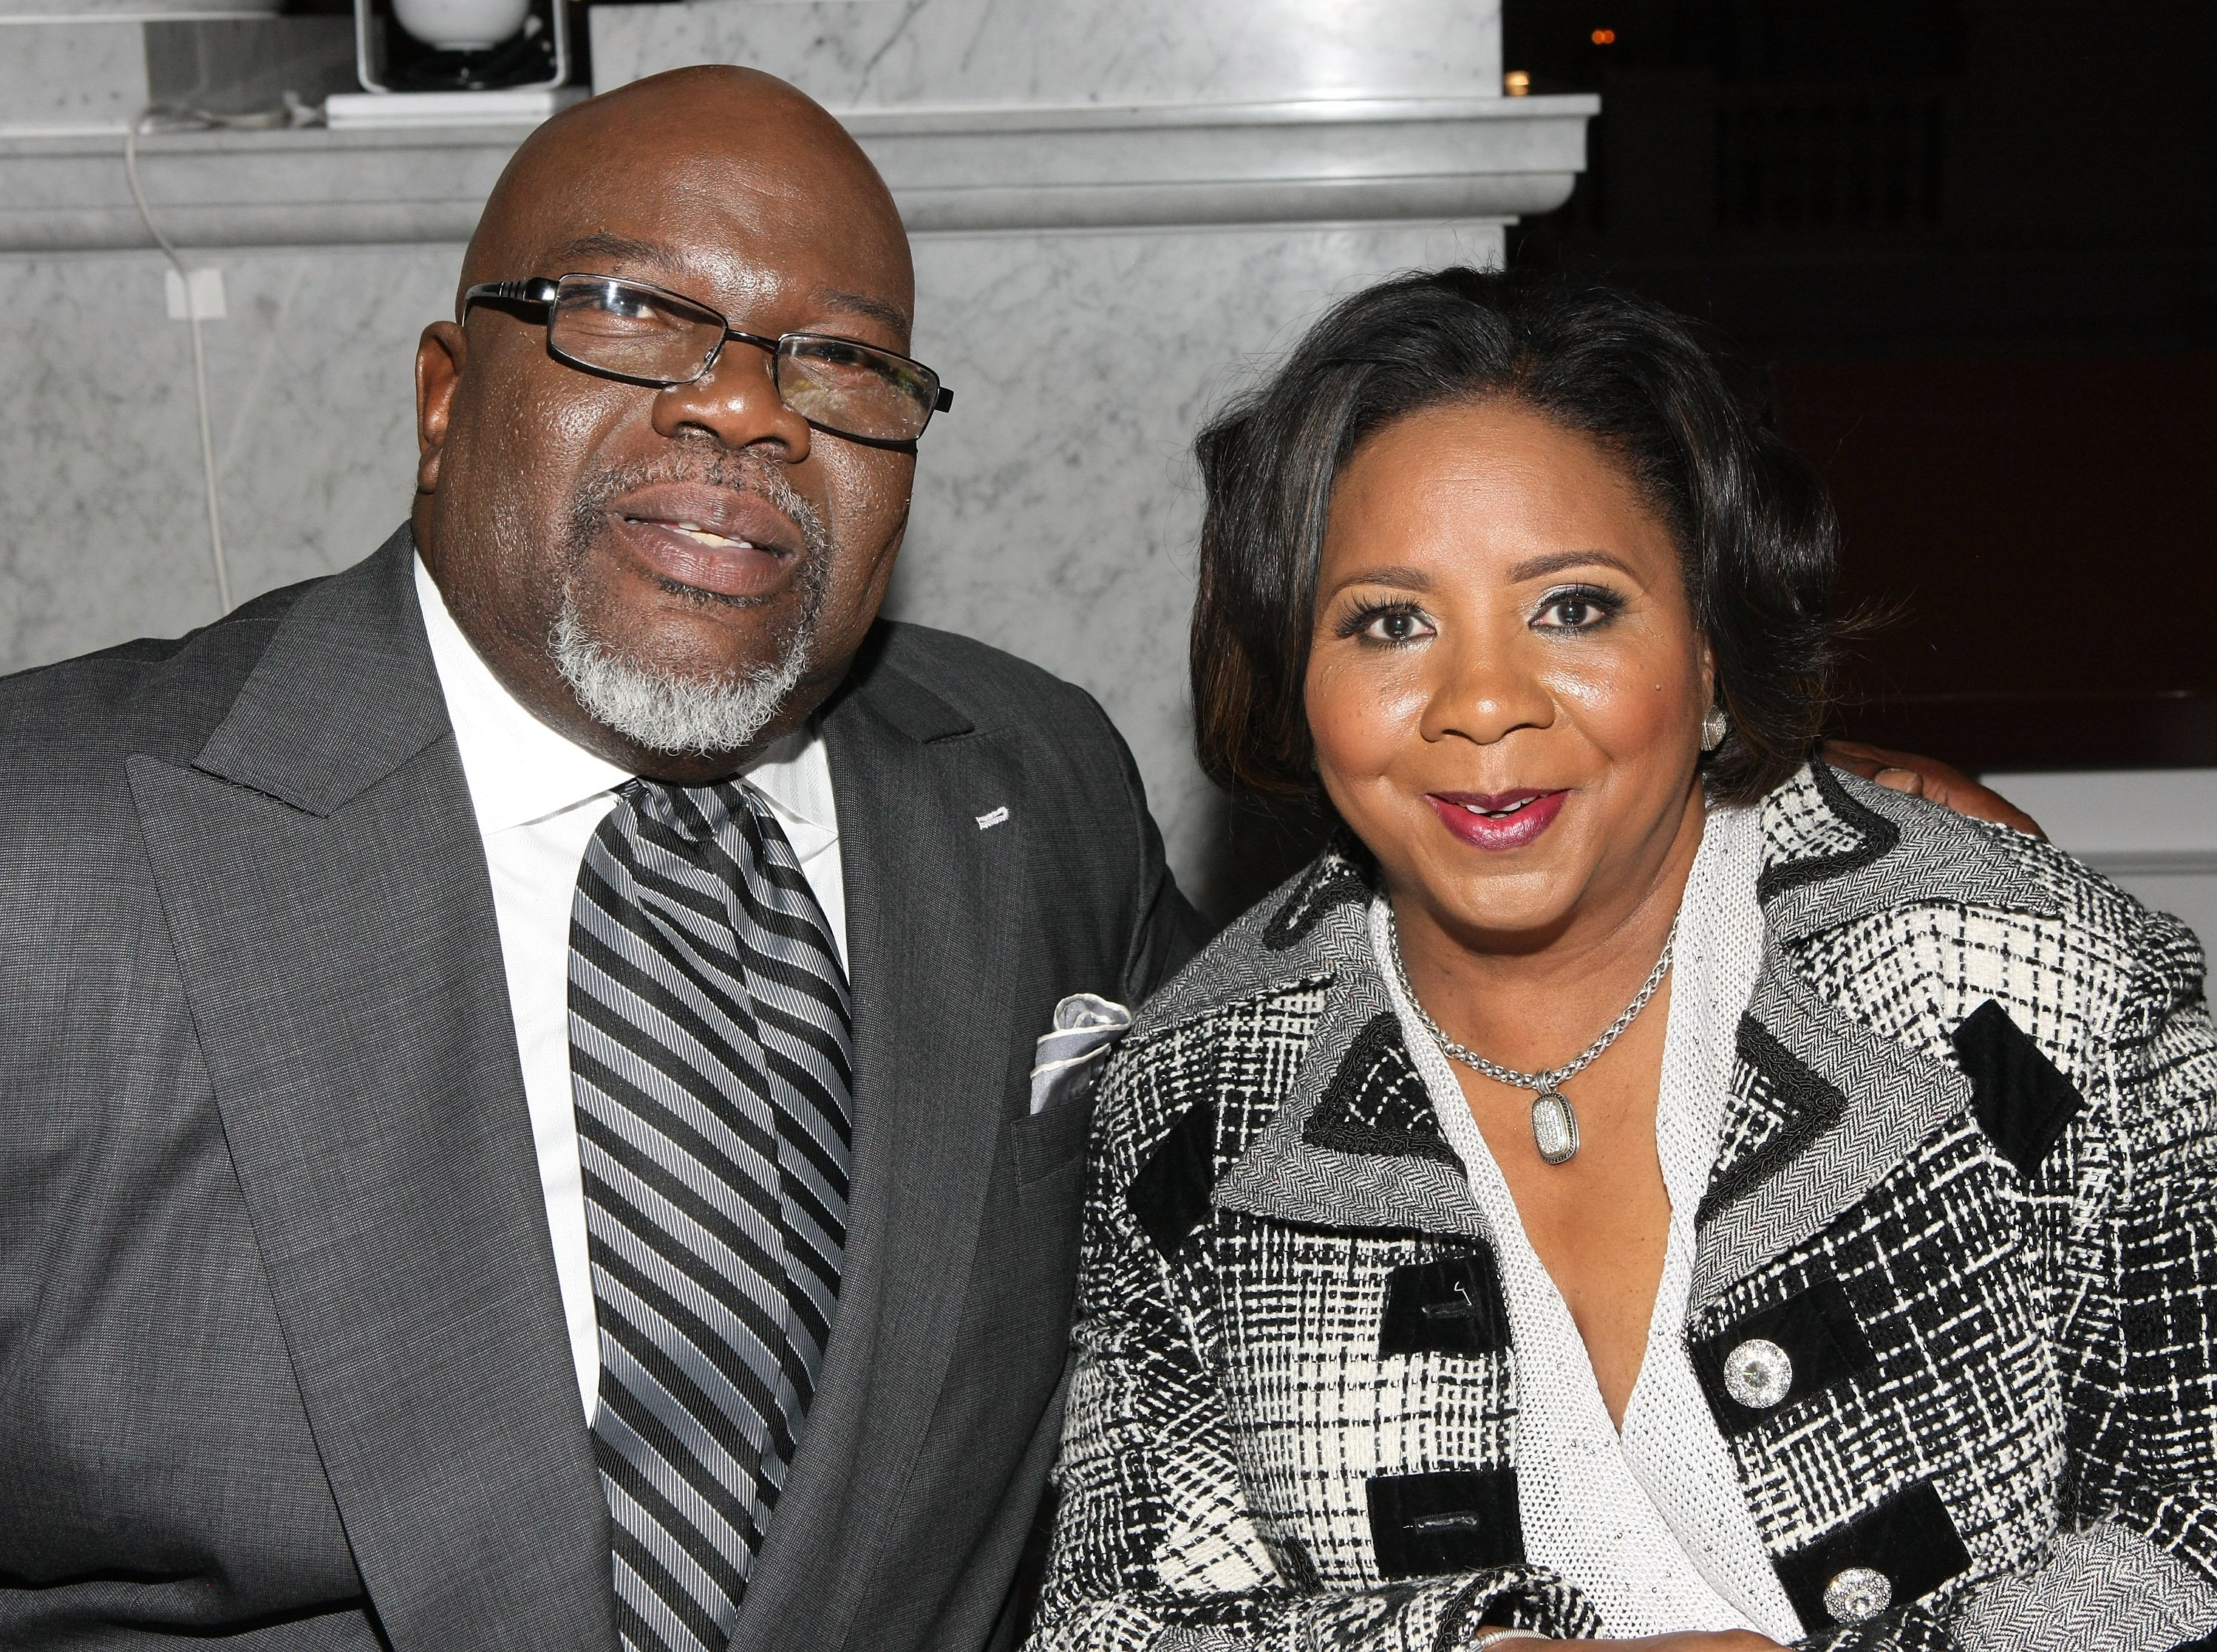 Bishop T. D. Jakes and his wife Serita Jakes at the BET Honors 2013  | Photo: Getty Images